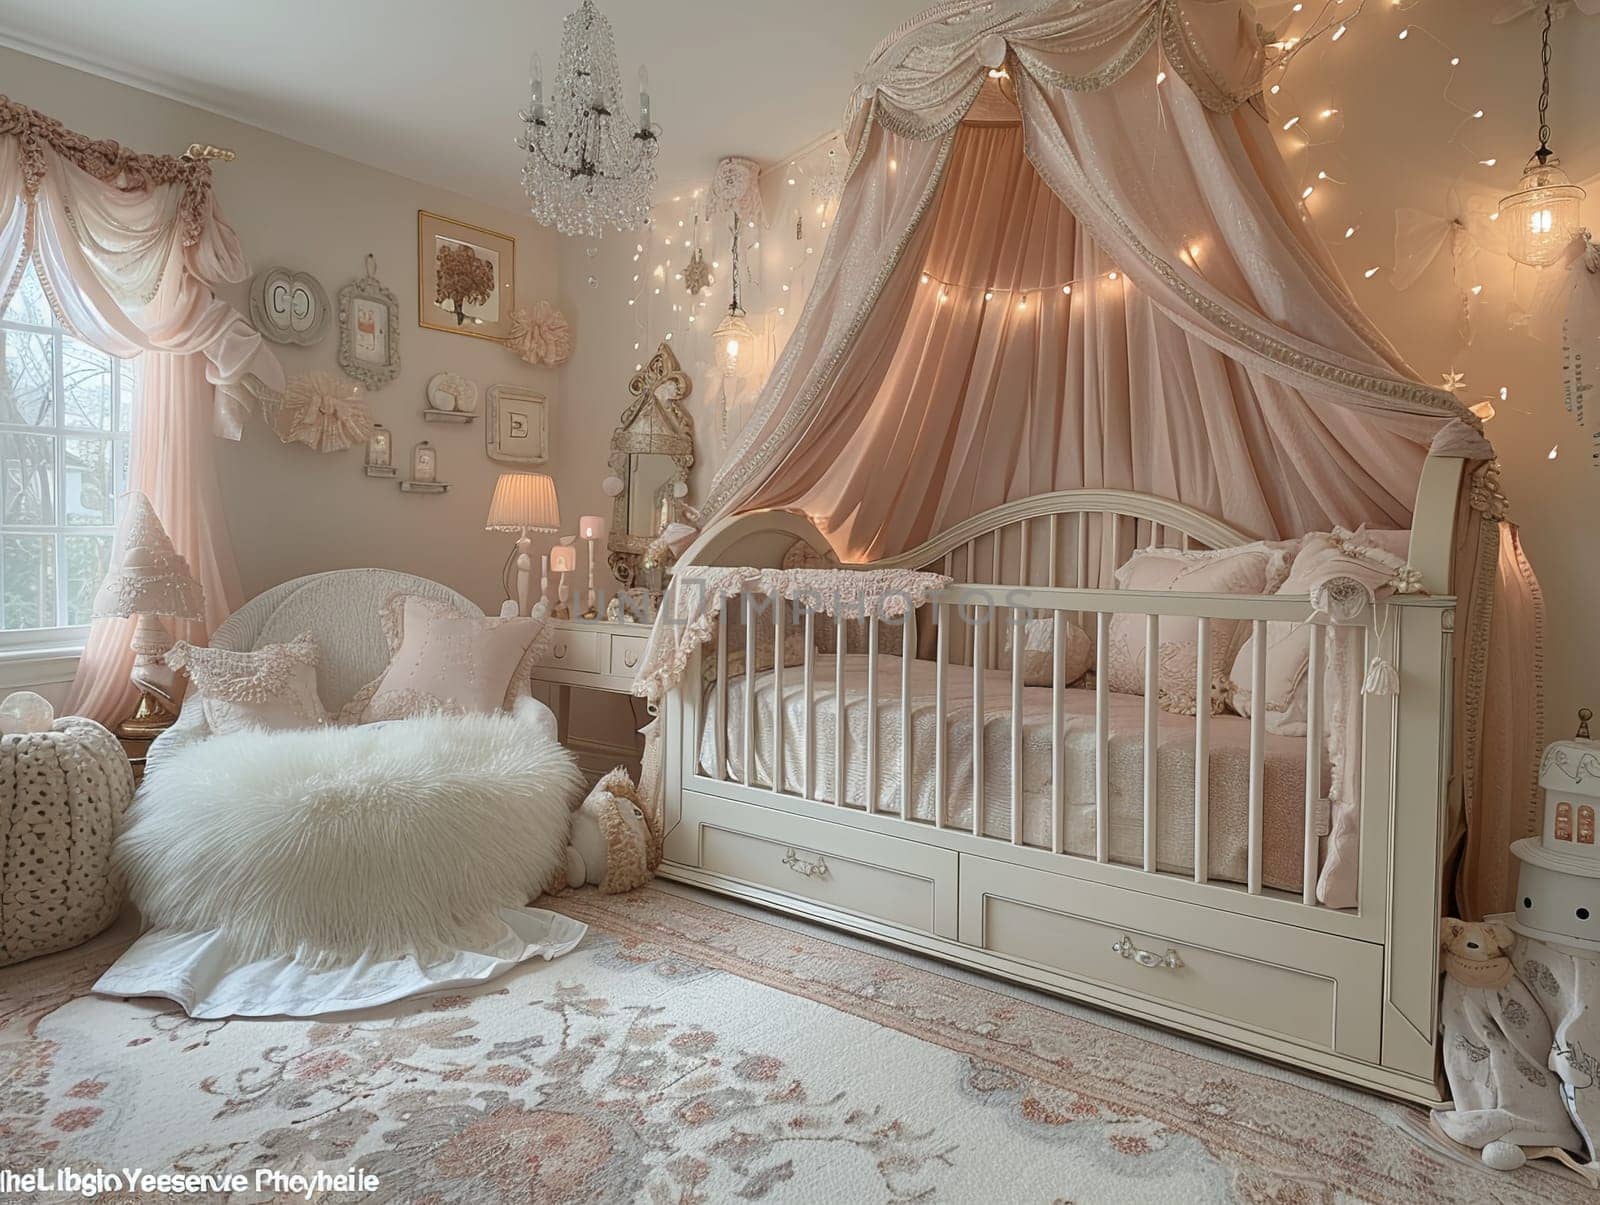 Whimsical fairy tale-themed nursery with magical accents and soft colors